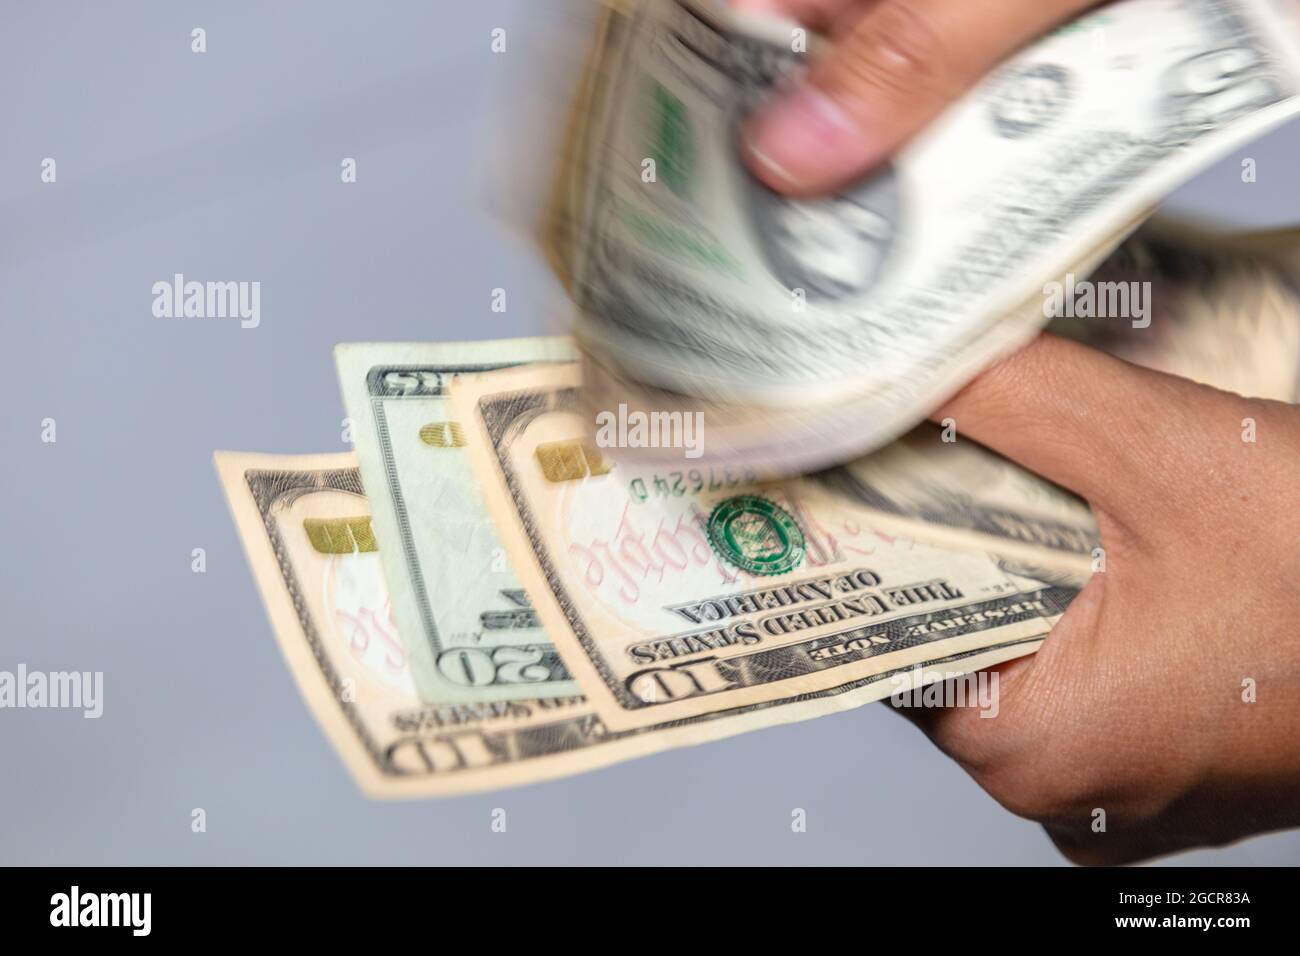 Female hands counting us dollars. Woman hand count the united states currency. A bunch of american  Banknotes.  The world currency is the US dollar. 1 Stock Photo